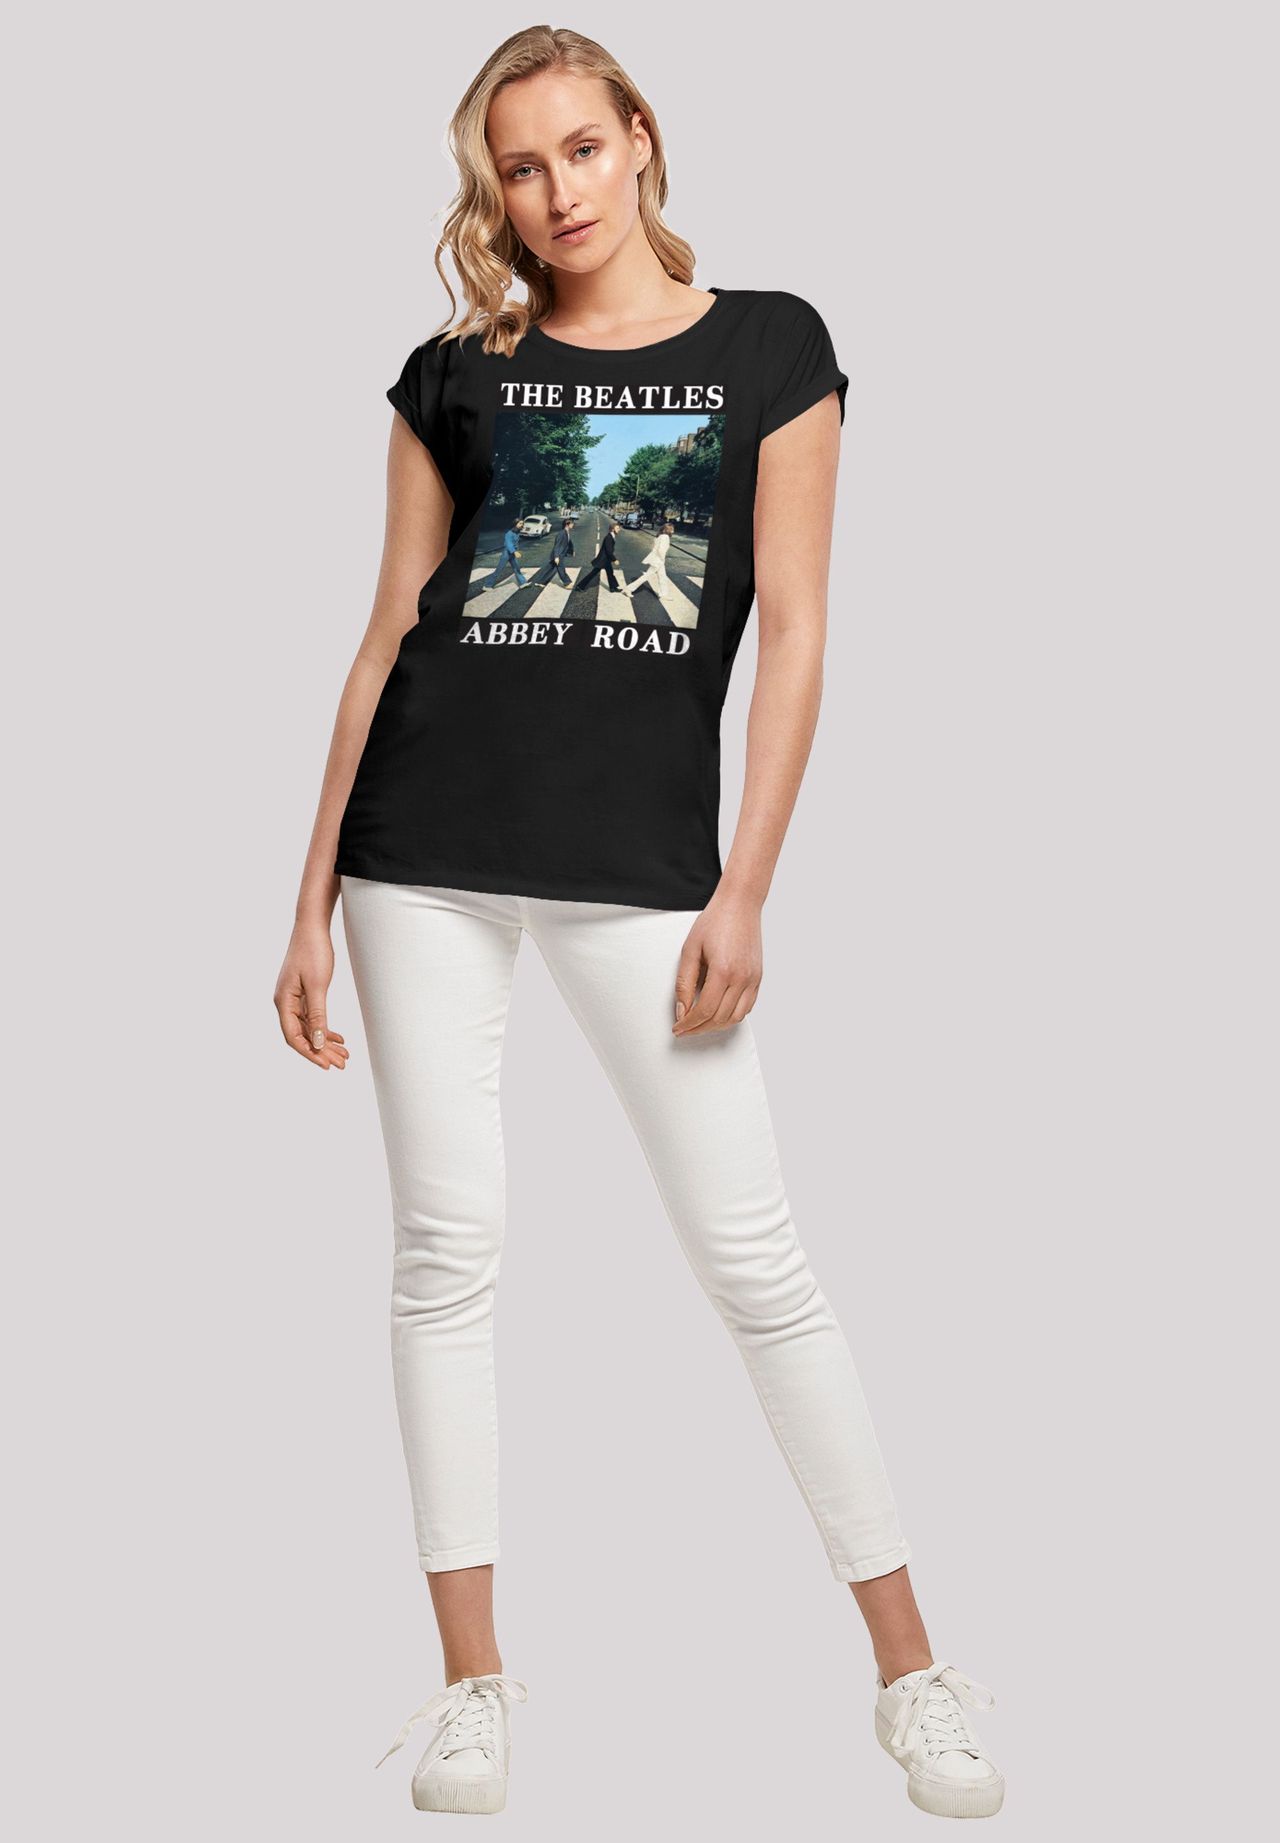 F4NT4STIC Extended Shoulder T-Shirt The Beatles Band Abbey Road | GALERIA